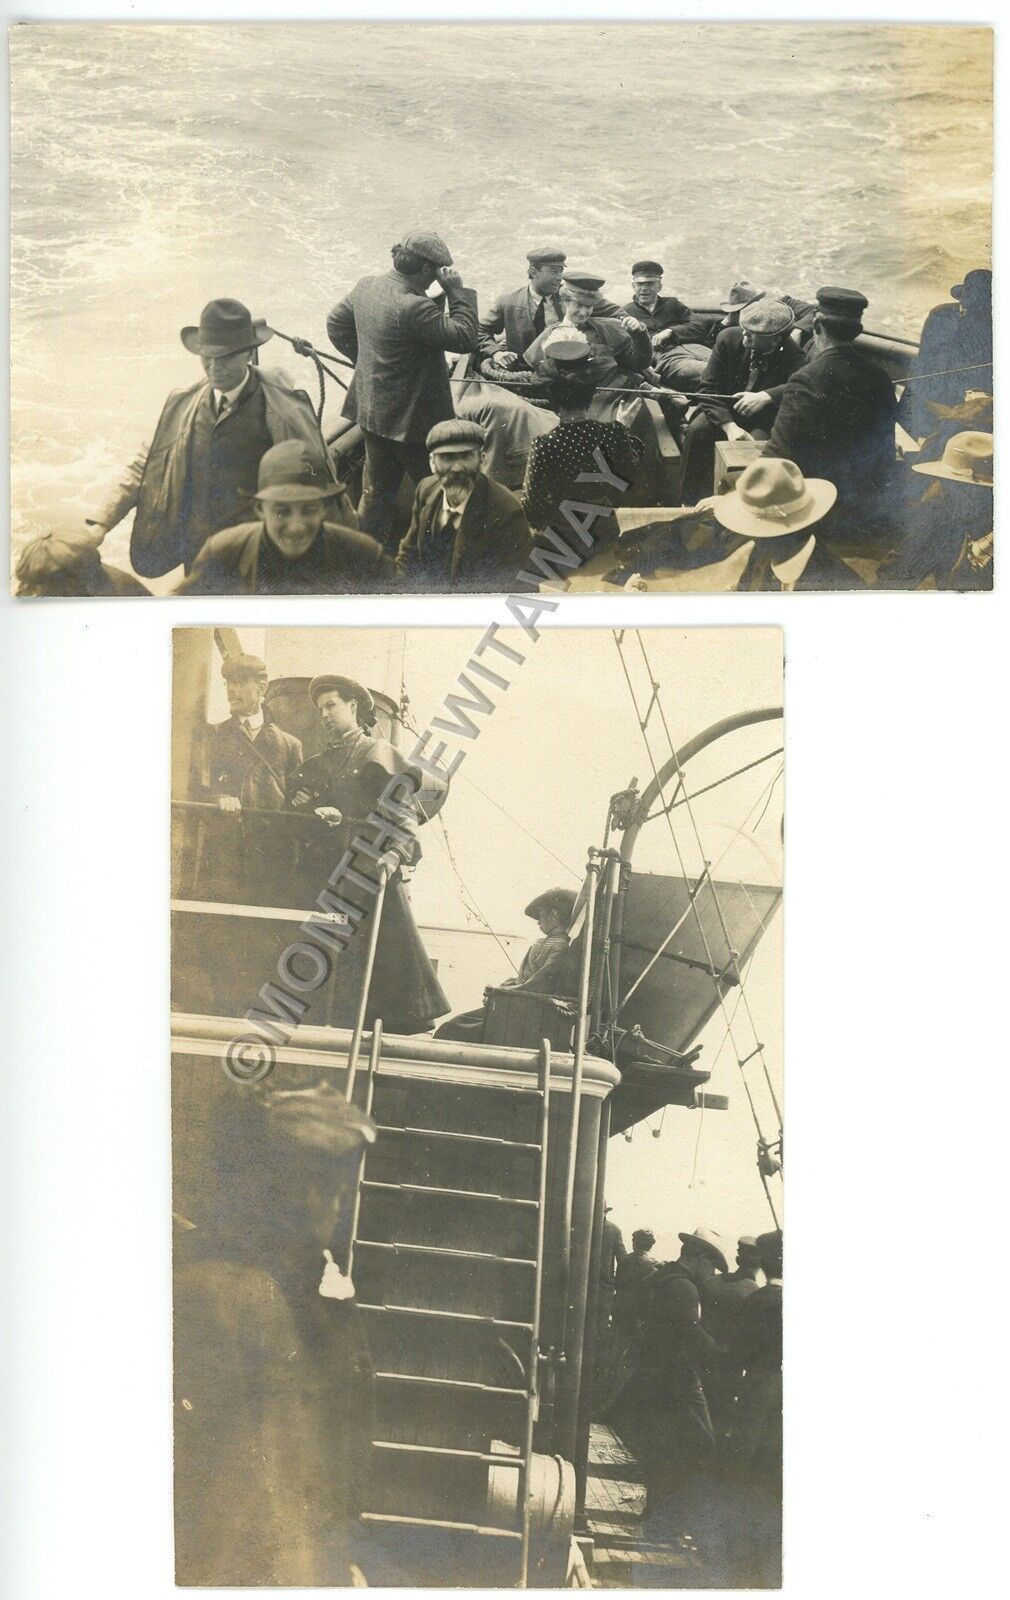 c1900s Photo OR Oregon 2 Views Group of People on Boats Portland? Unknown